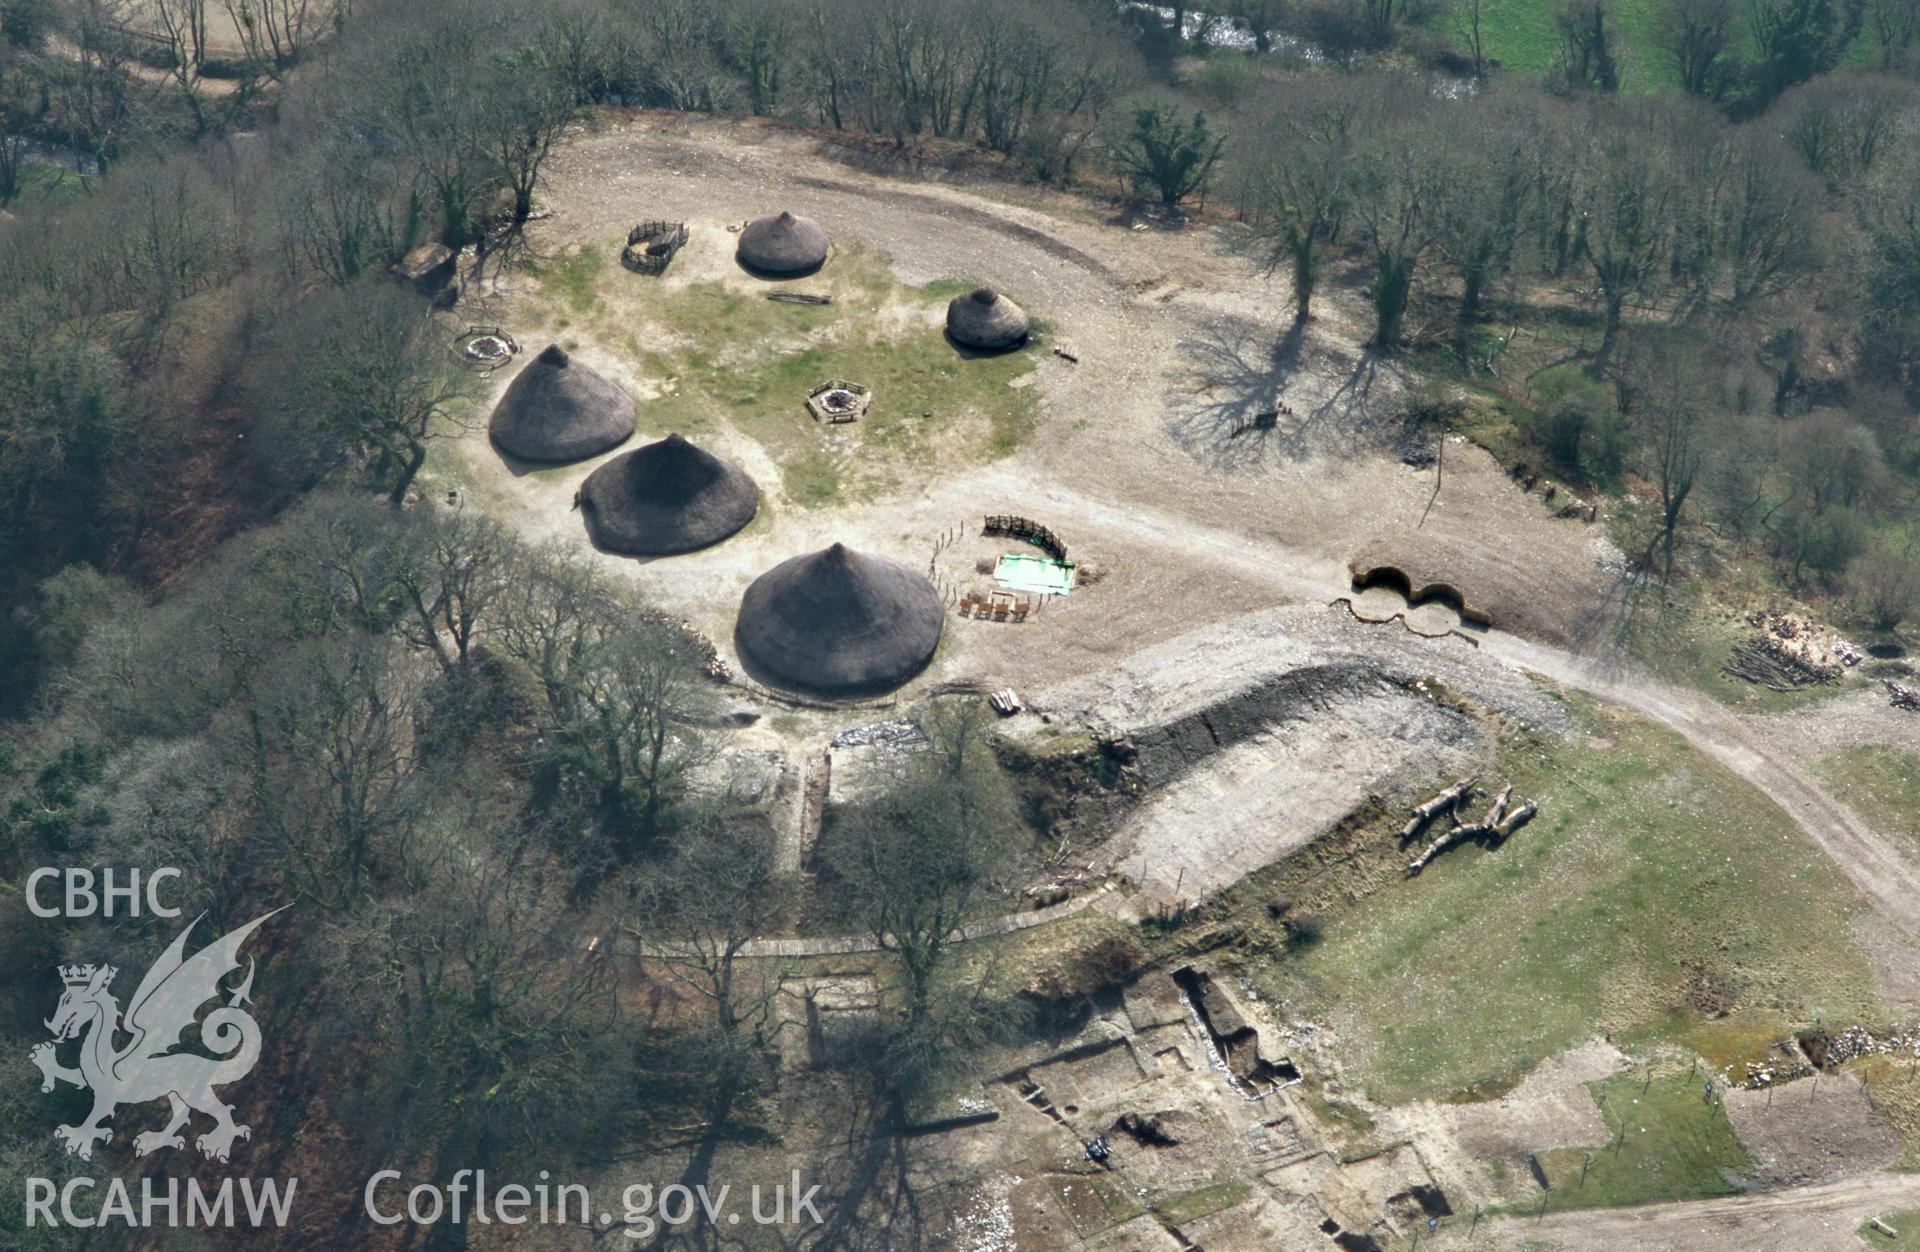 RCAHMW colour oblique aerial photograph of Castell Henllys, hillfort, stereo colour, left side. Taken by Toby Driver on 31/03/2003